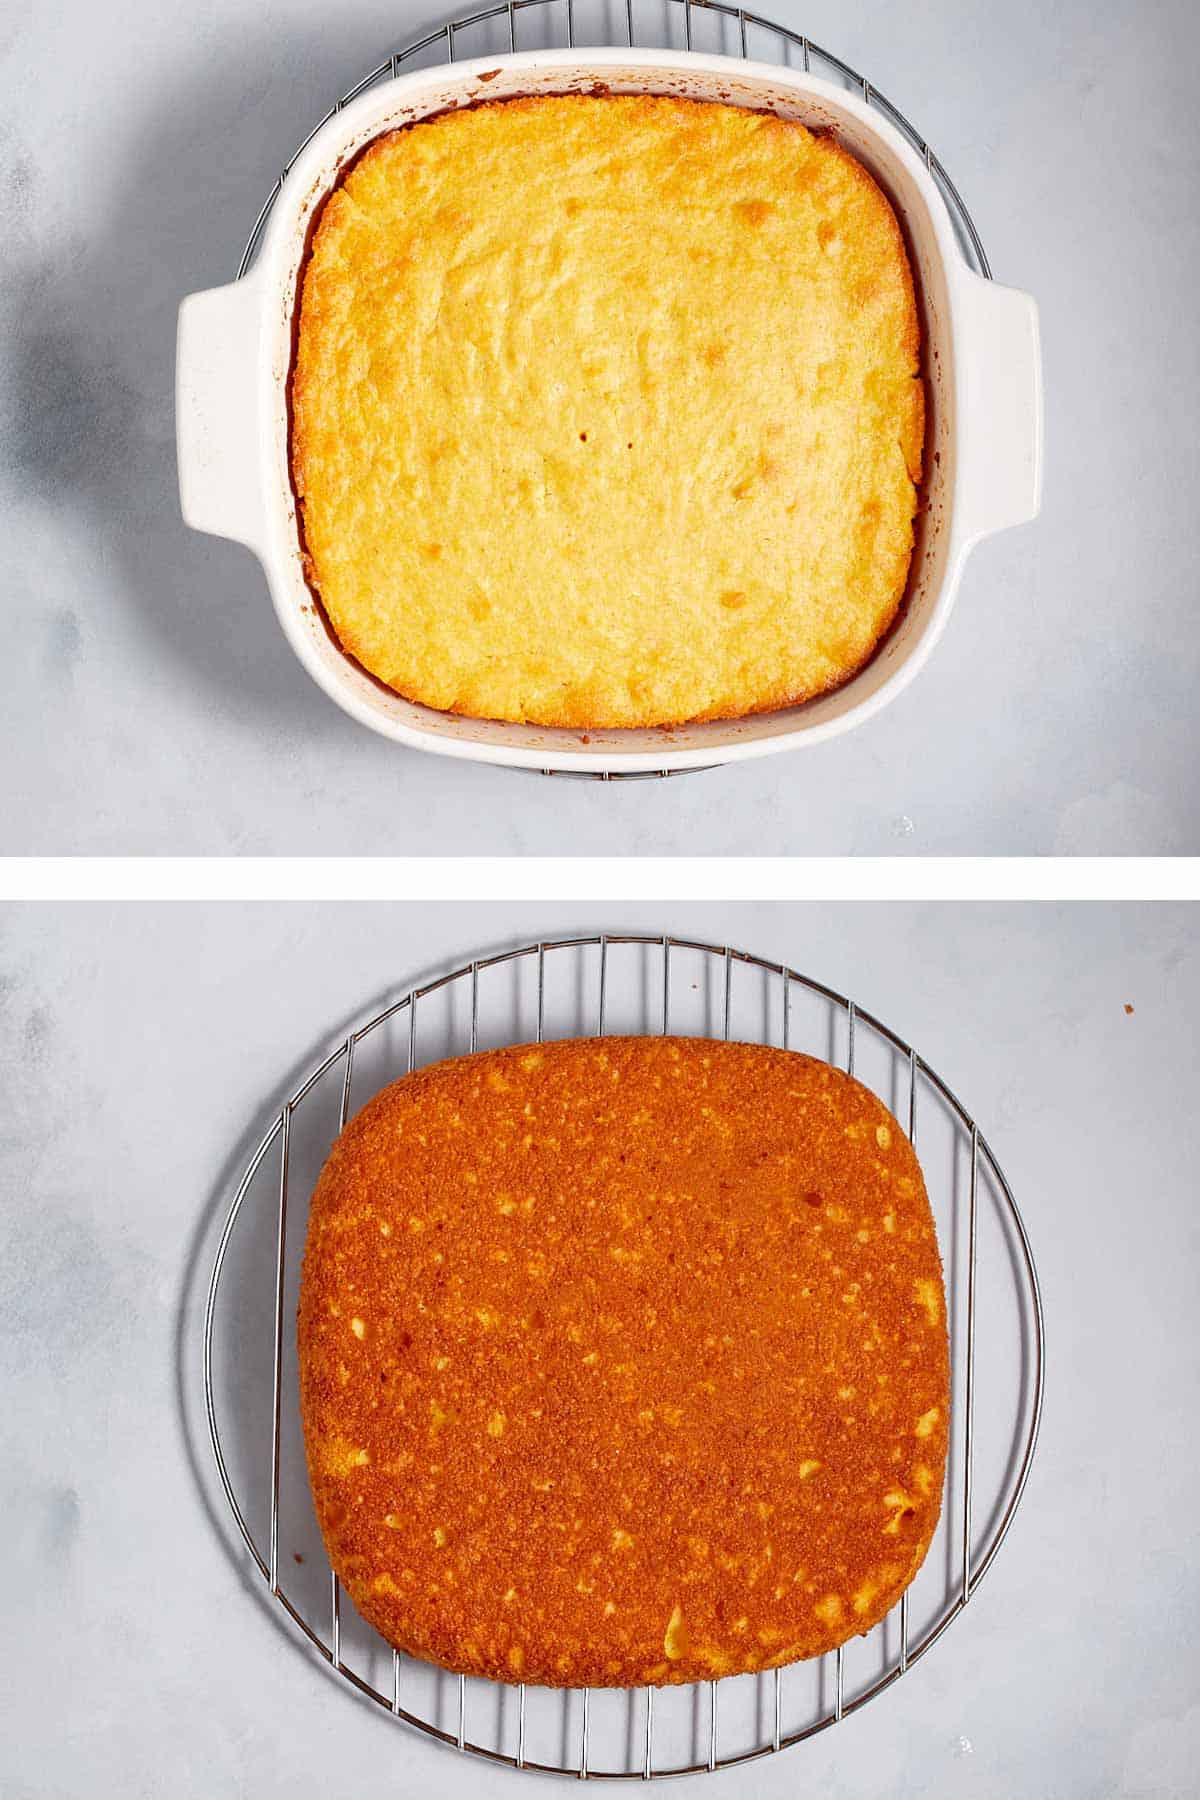 Pan of baked cornbread and baked cornbread on a cooling rack.